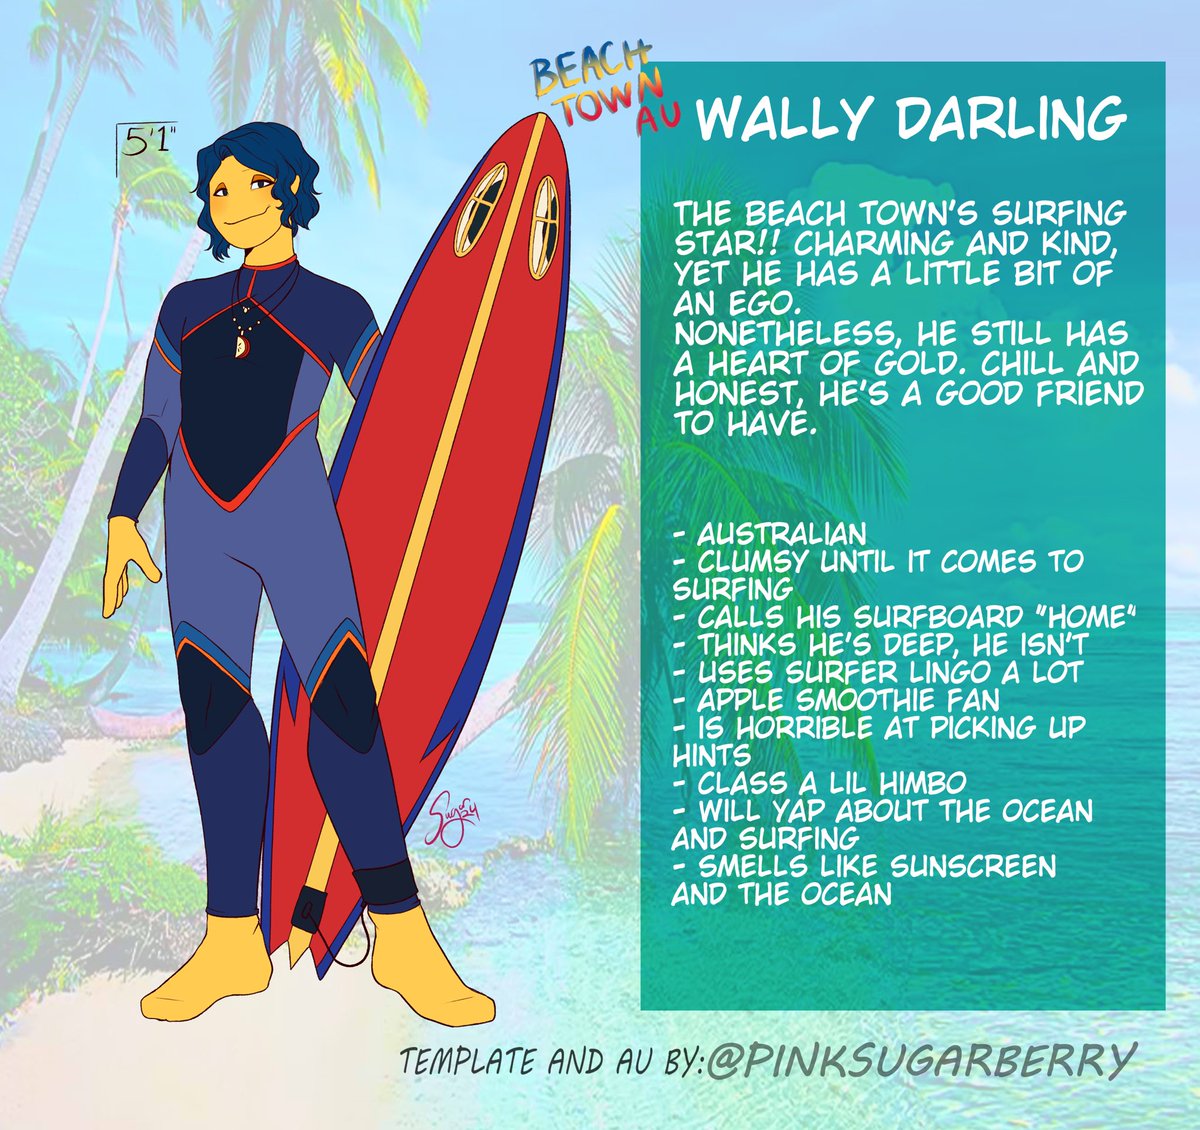 No way‼️ BeachTown Wally in 2024⁉️